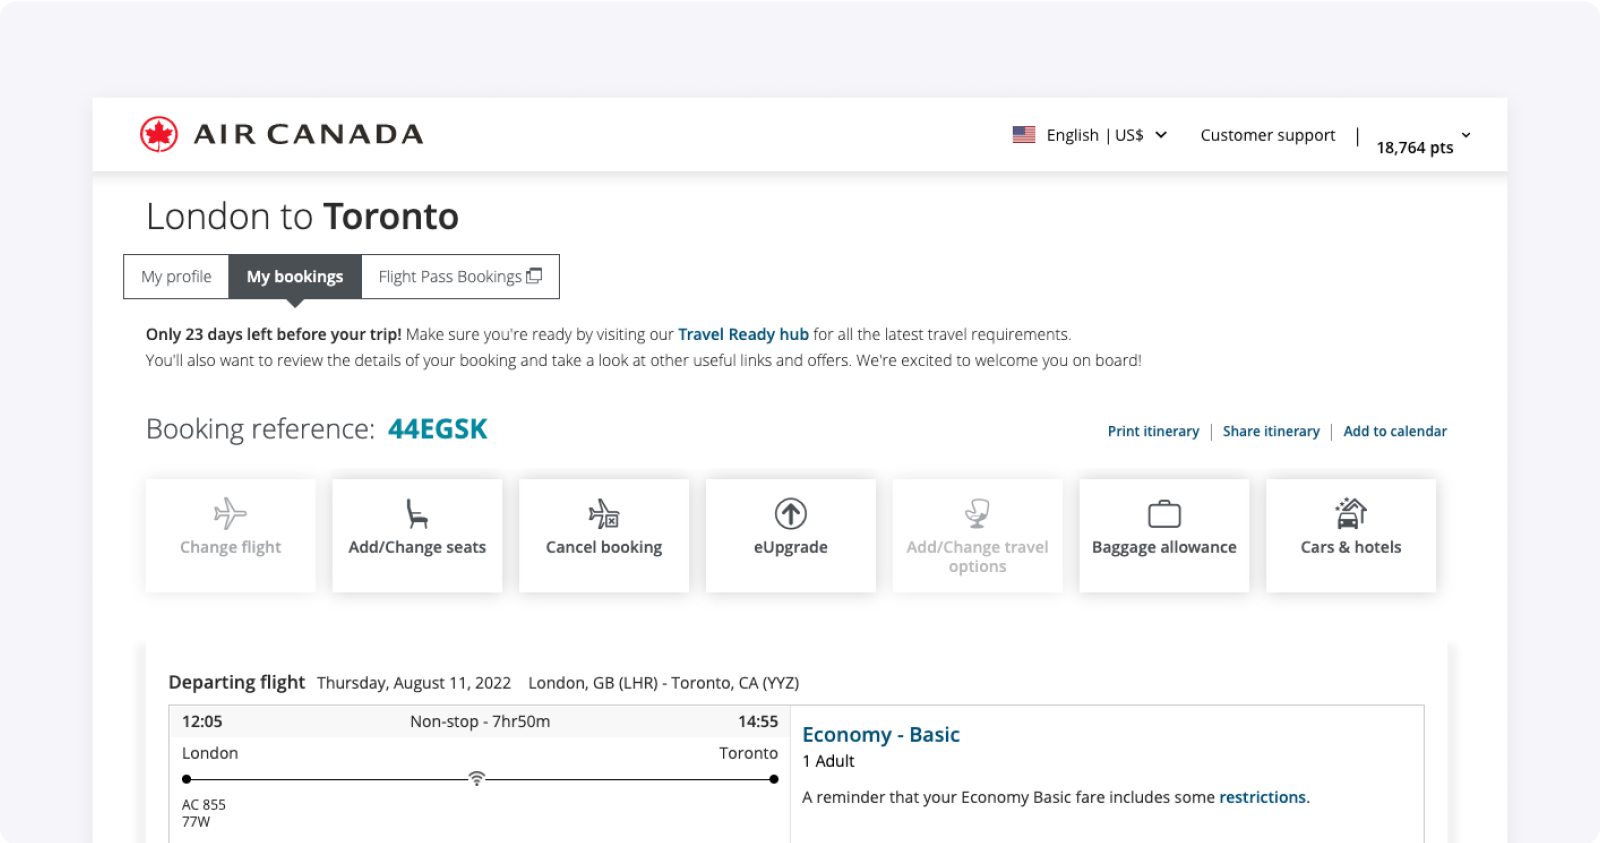 Partial screenshot of the Air Canada order booking page